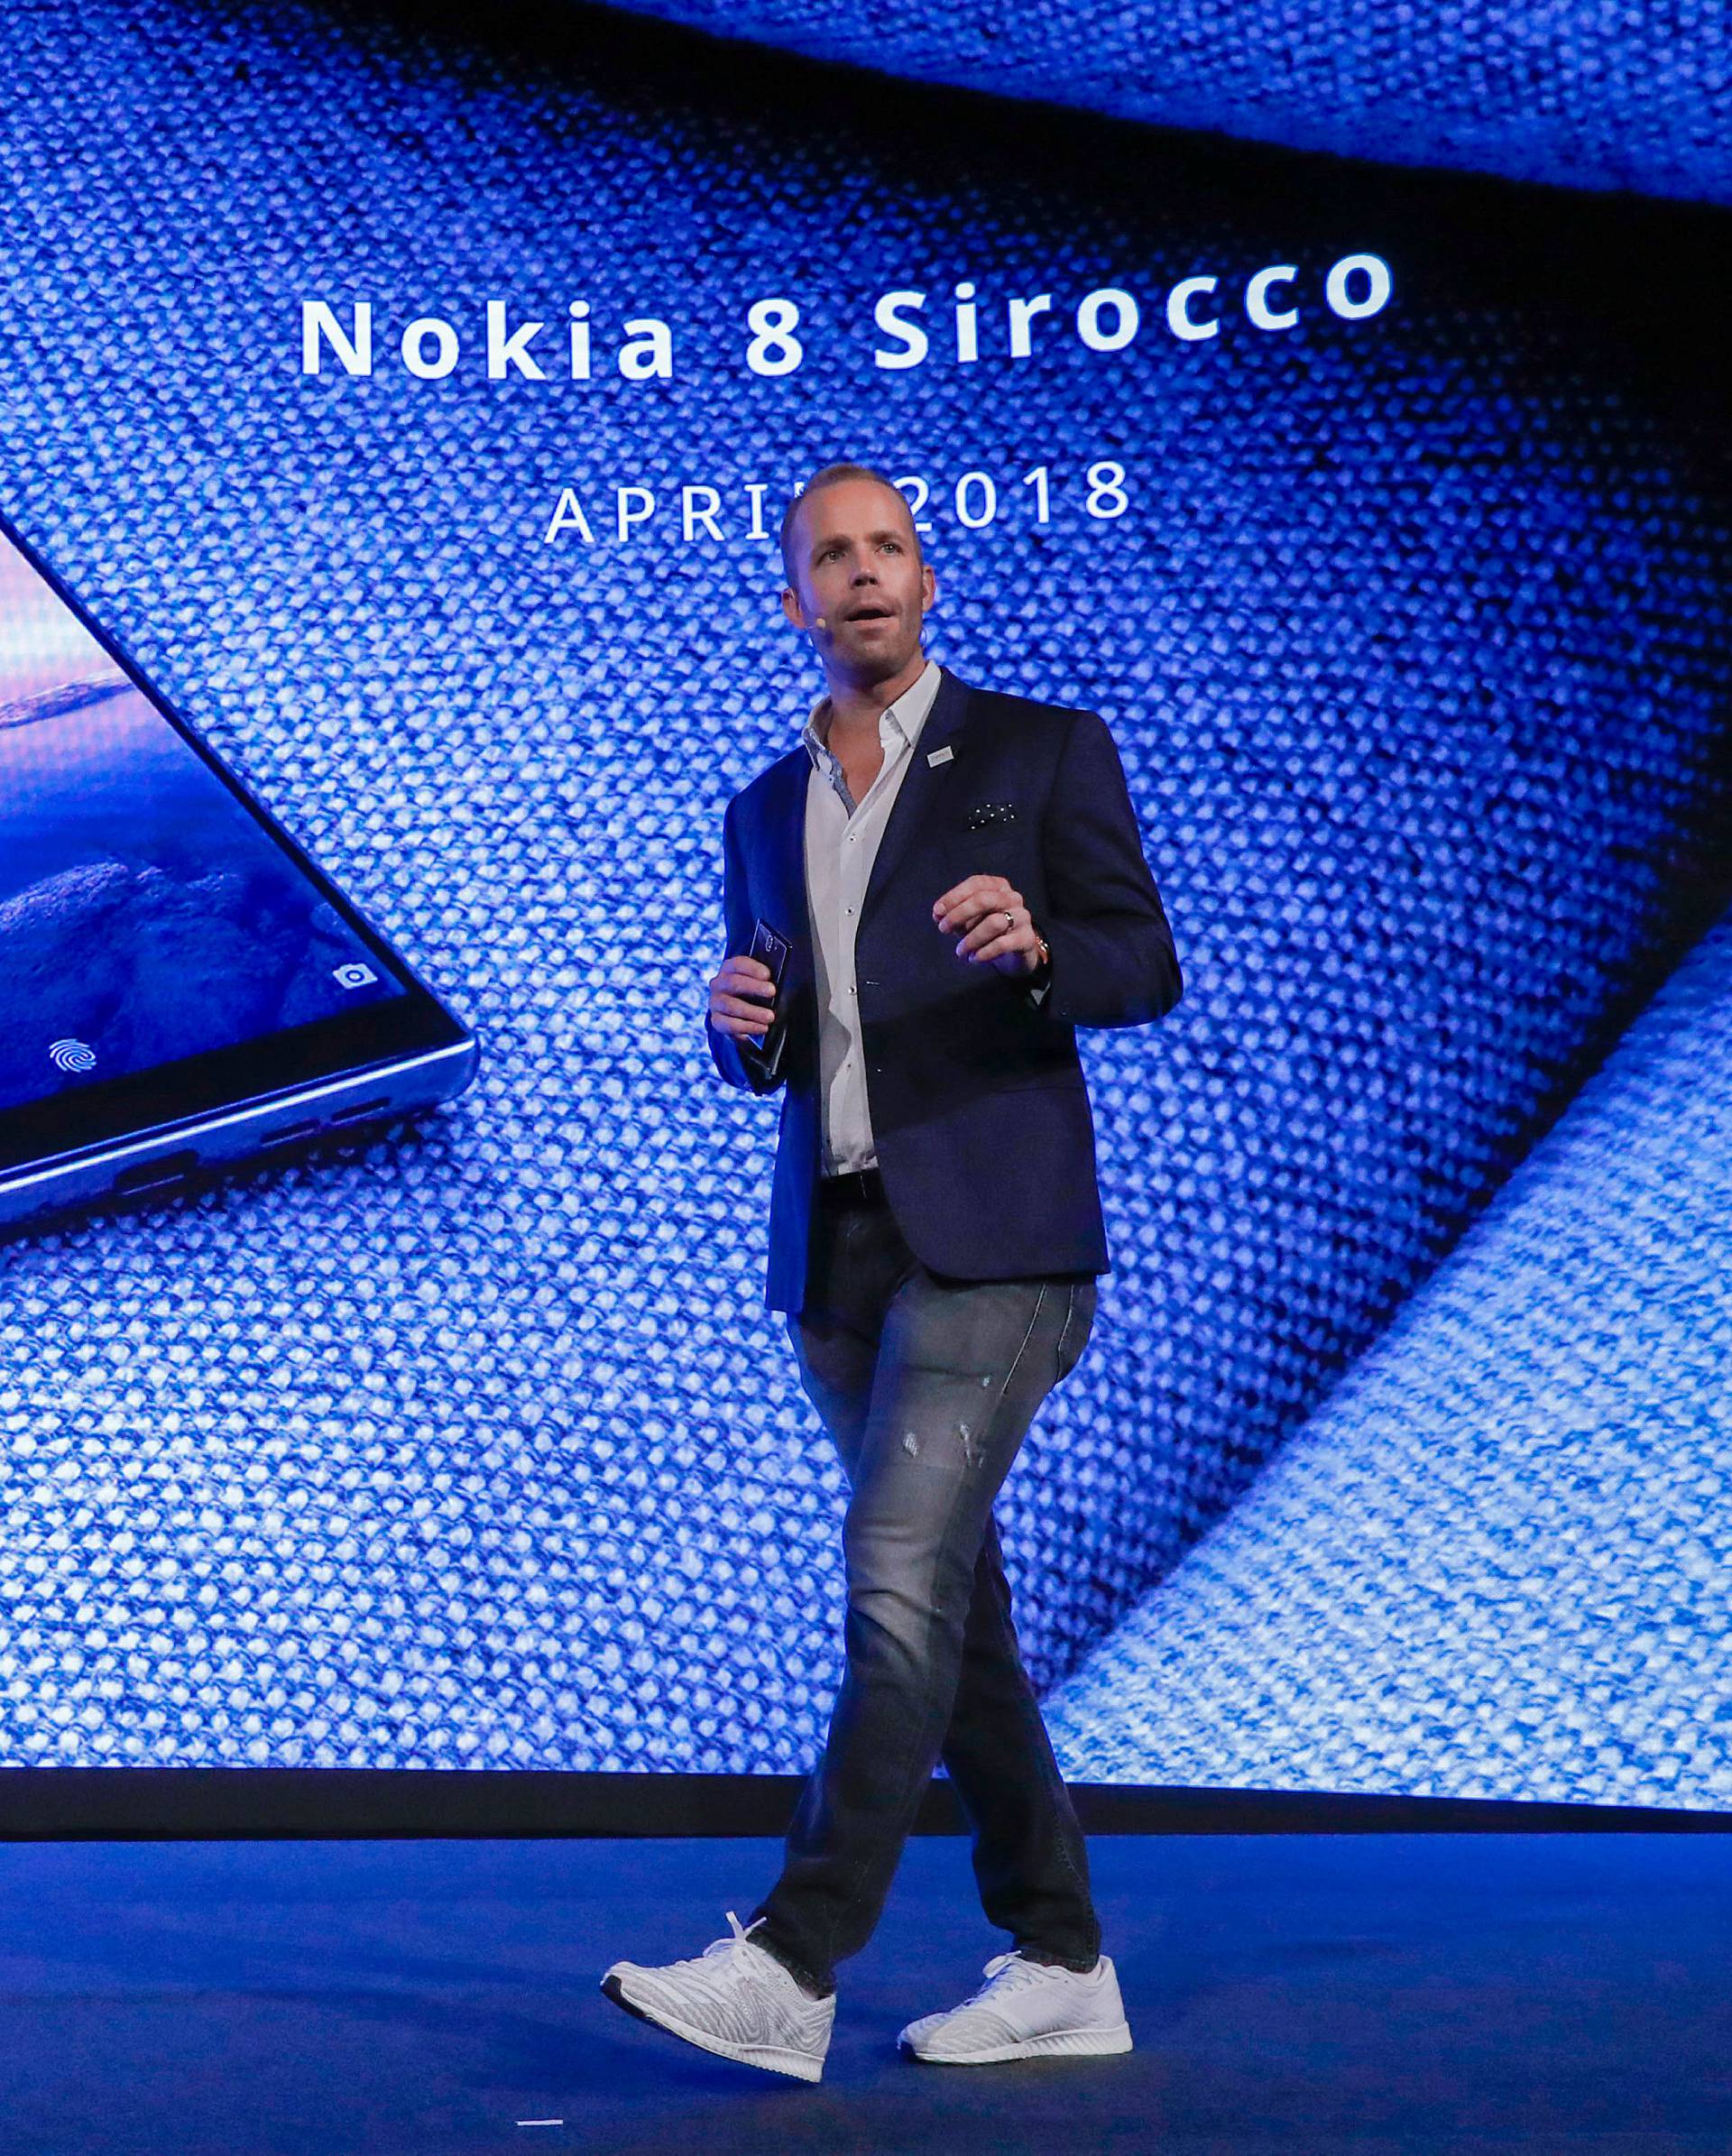 Juho Sarvikas, Chief Product Officer at HMD Global presents the new Nokia 8 Sirocco during the Mobile World Congress in Barcelona